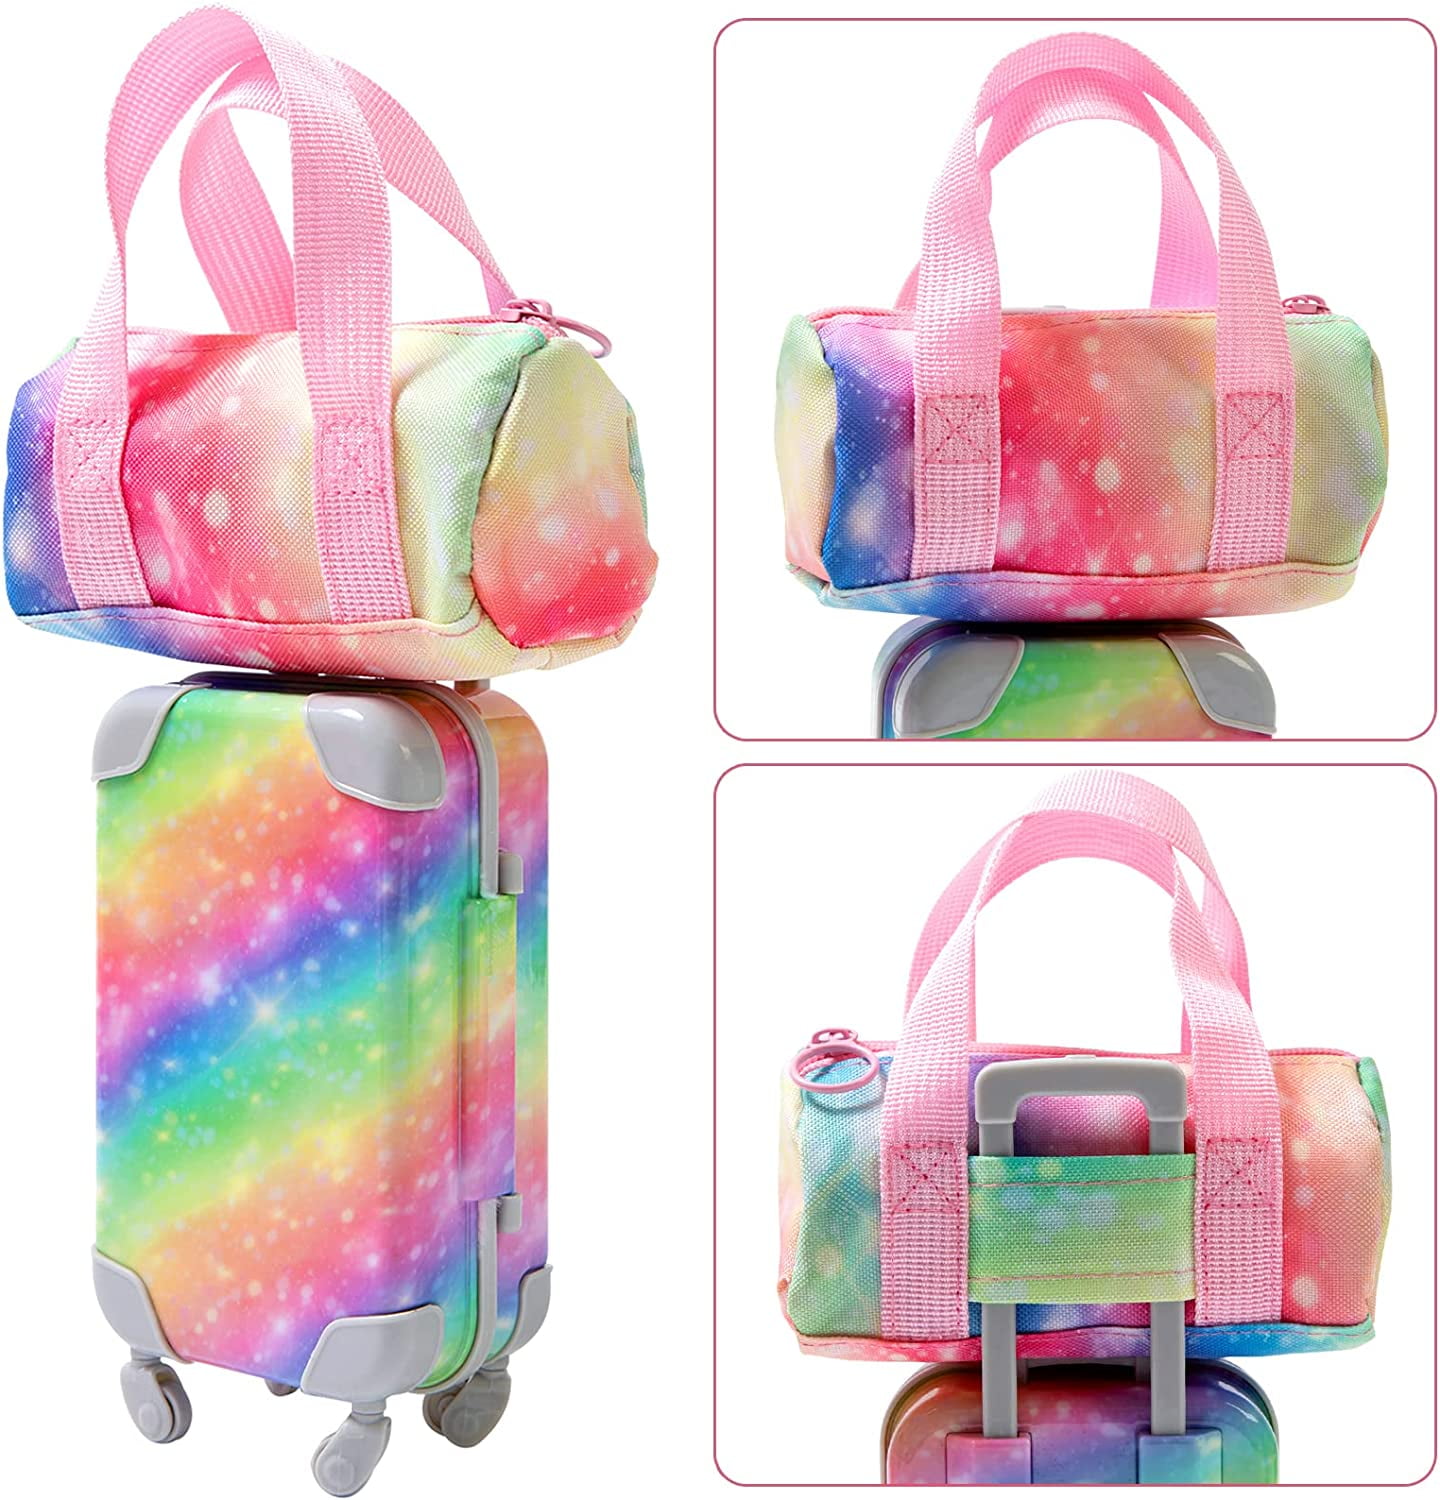 KT Fancy 23 PCS American 18 Inch Doll Accessories Suitcase Luggage Travel  Set - Rainbow Suitcase Rainbow Bag Camera Computer Cell Phone Neck Pillow